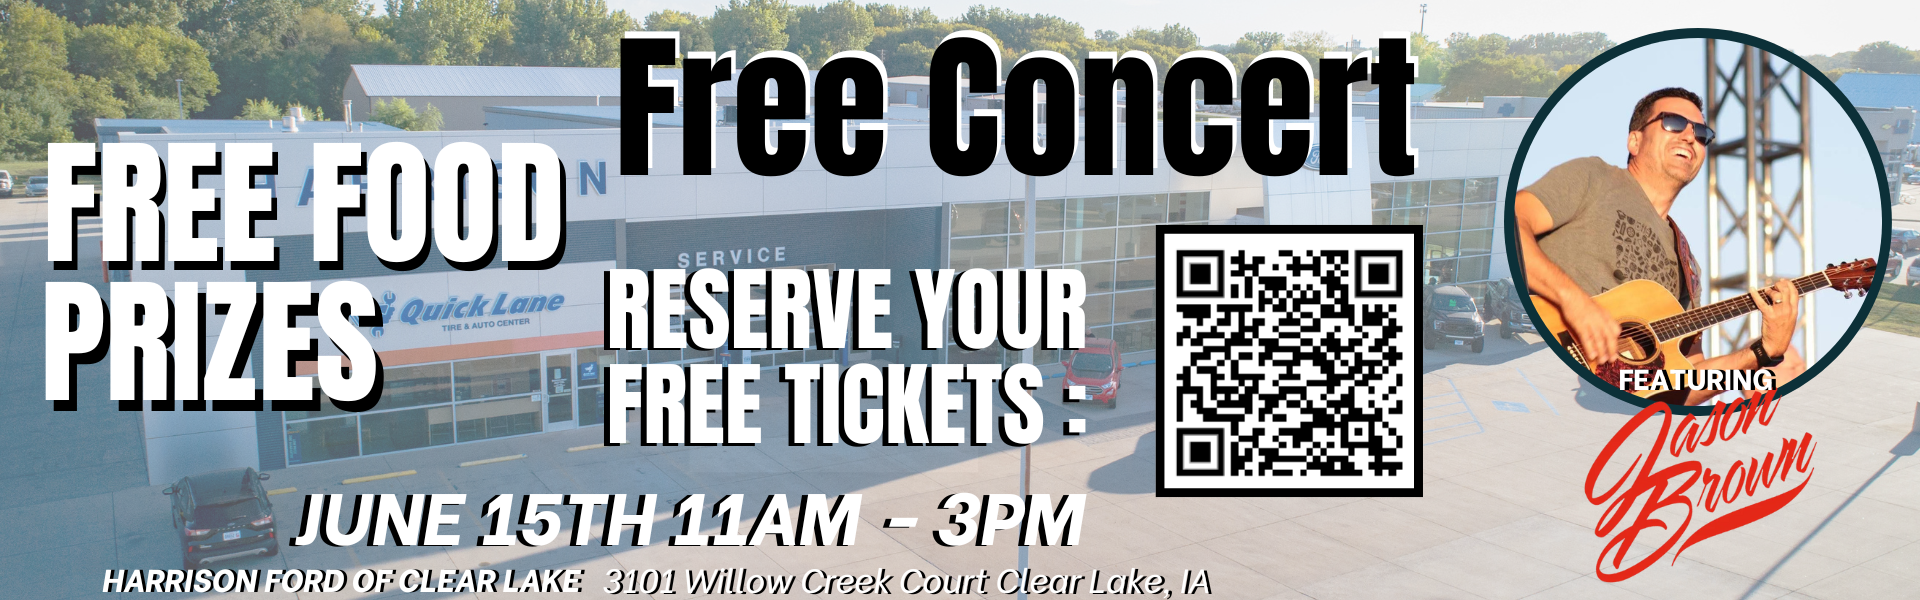 Free Concert Tickets